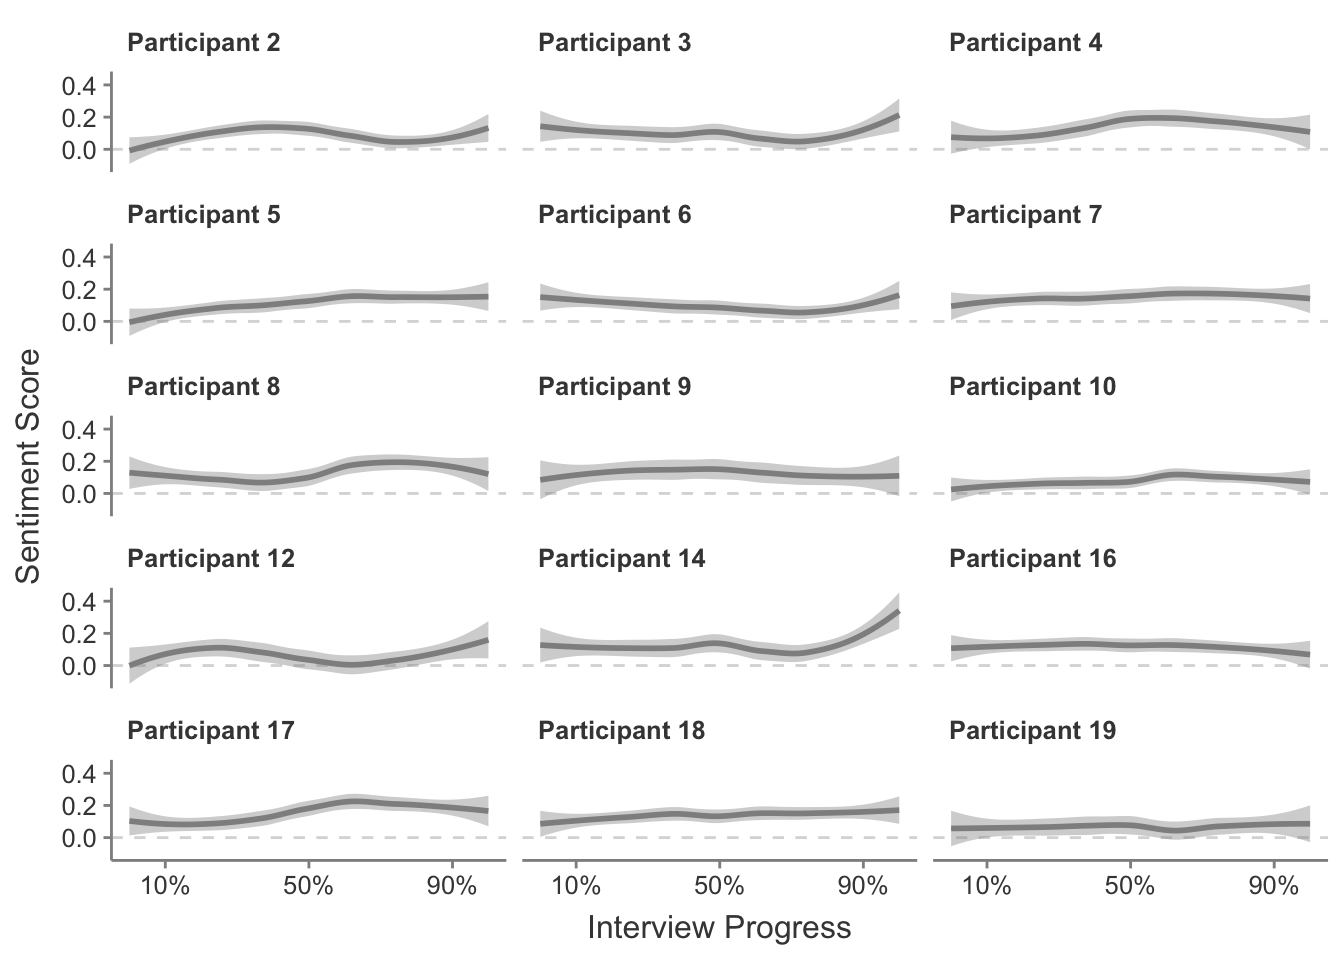 Sentiment scores for each participant interview, smoothed.